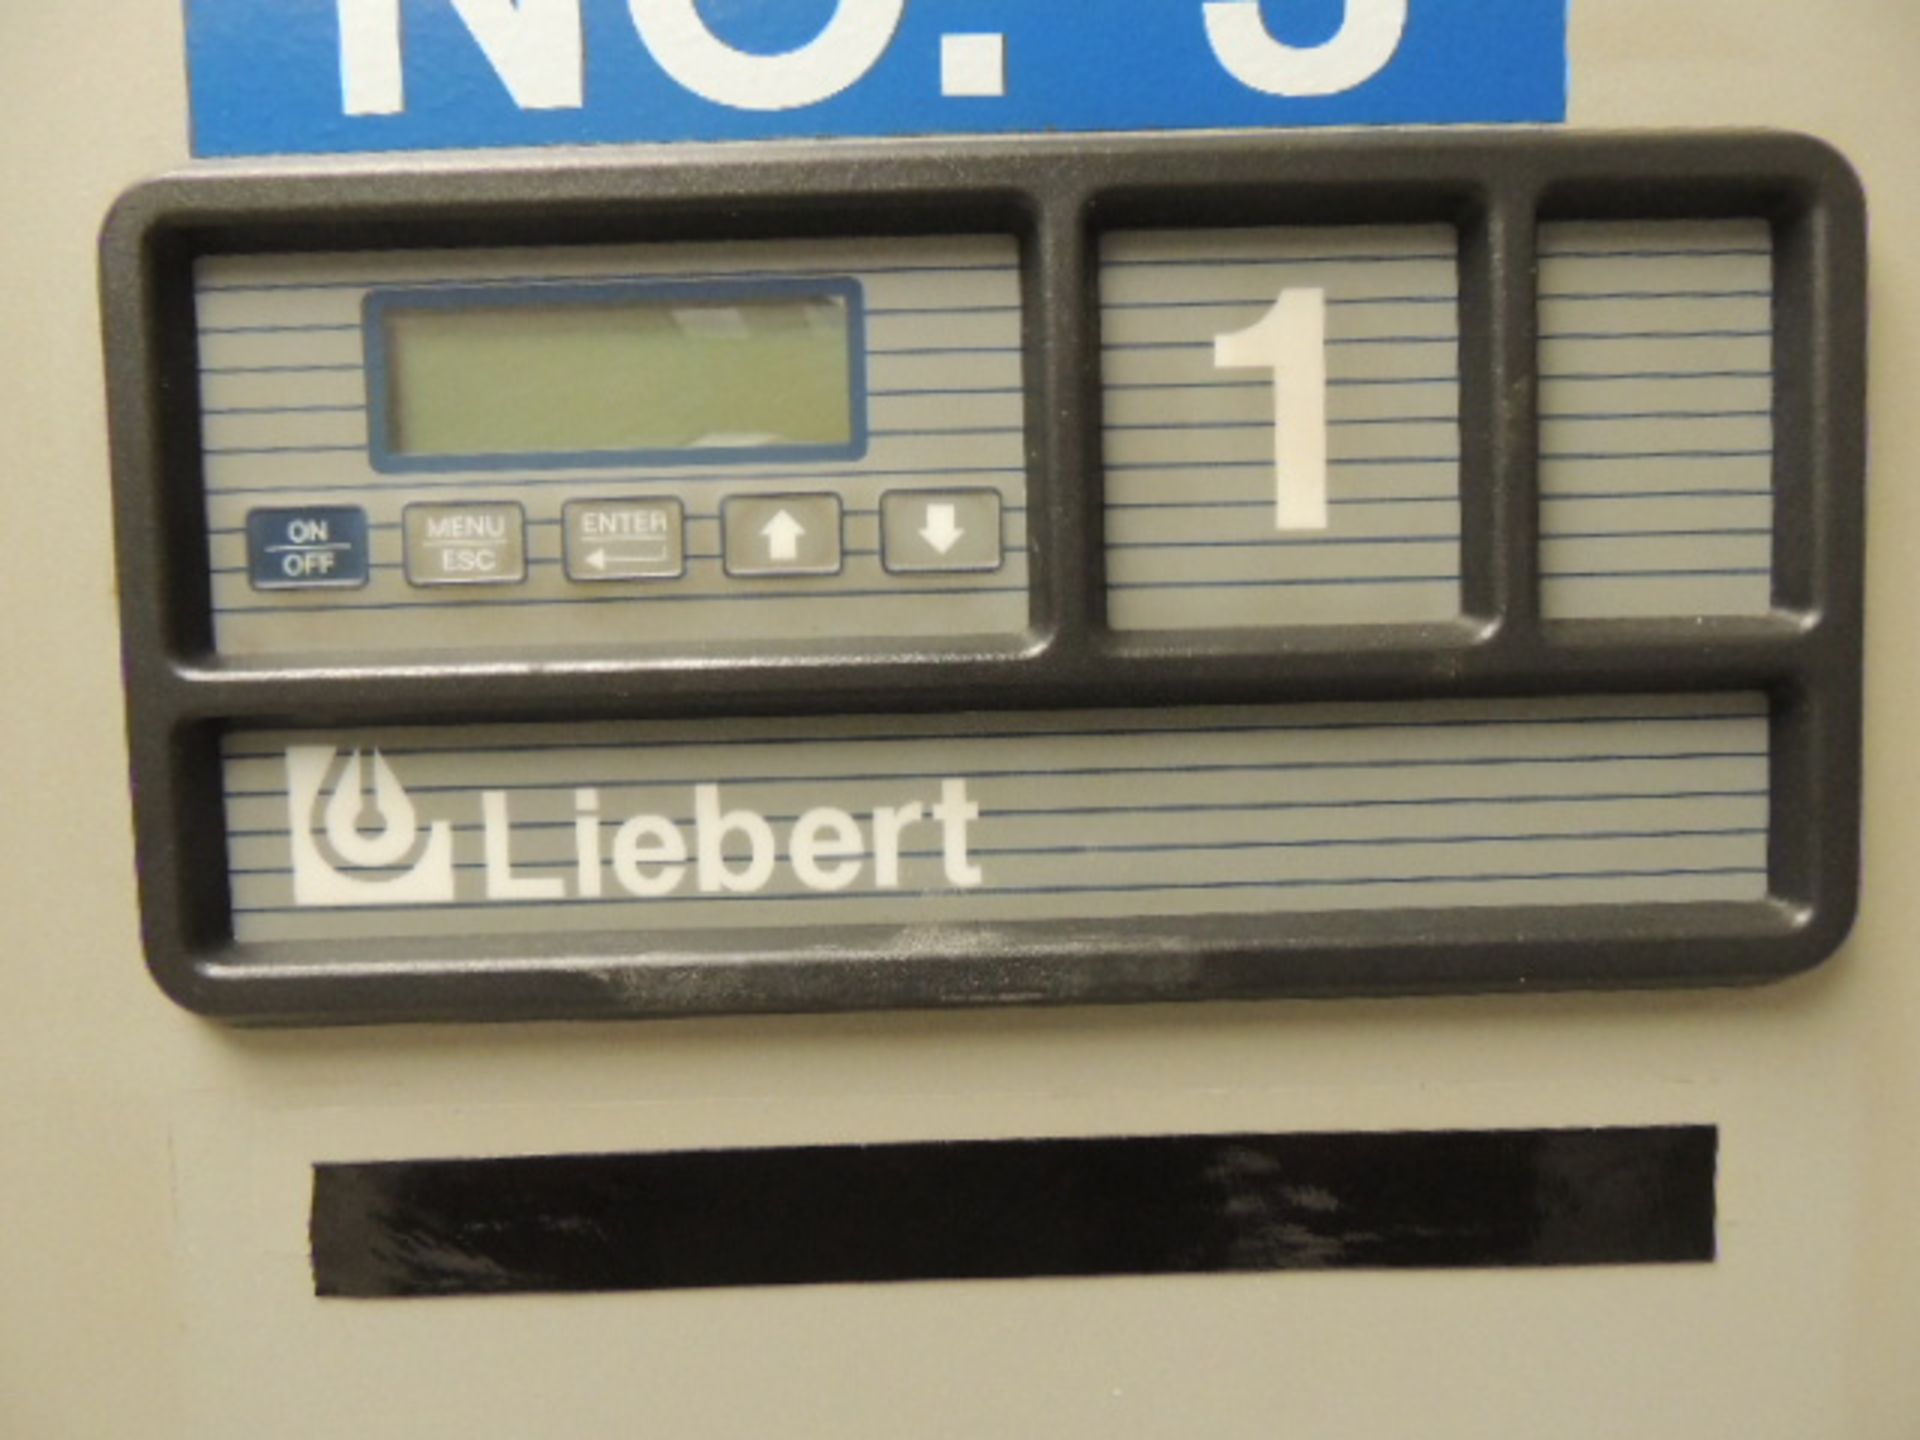 Liebert DH290AUAAEI Air conditioning system with a condensate pump, advanced micro processor - Image 4 of 7